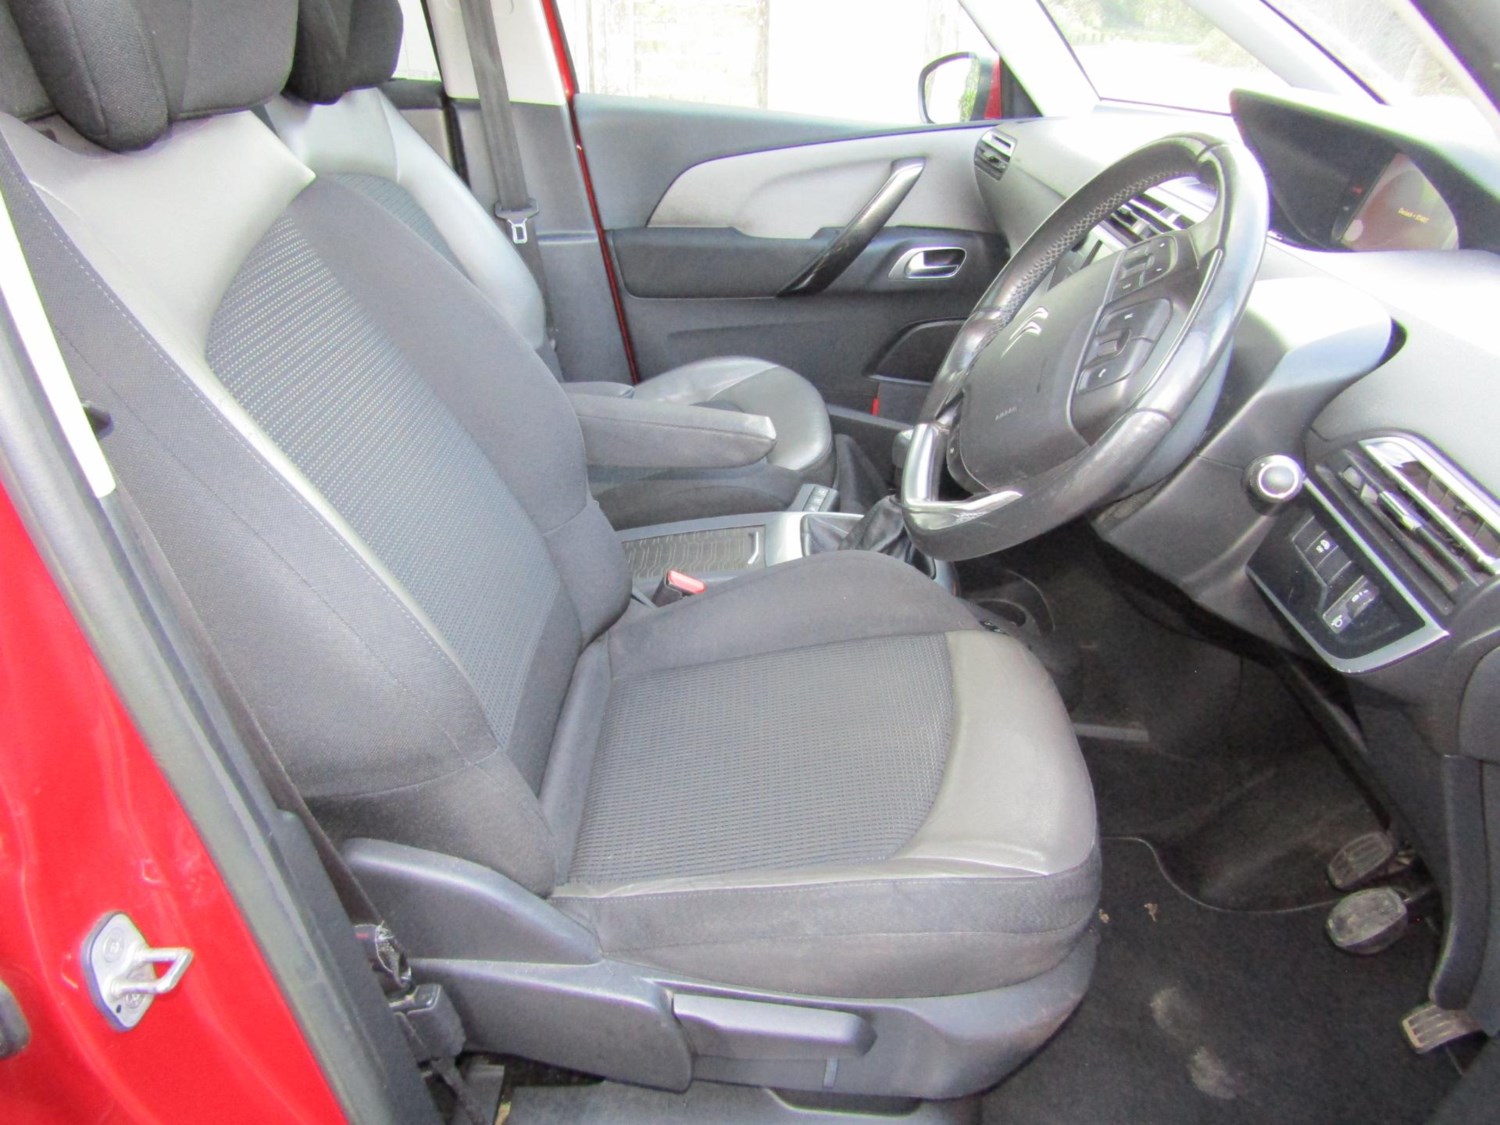 2014 (14) Citroen C4 Picasso 1.6 e-HDi 115 Airdream Exclusive+ 5dr For Sale In Broadstairs, Kent